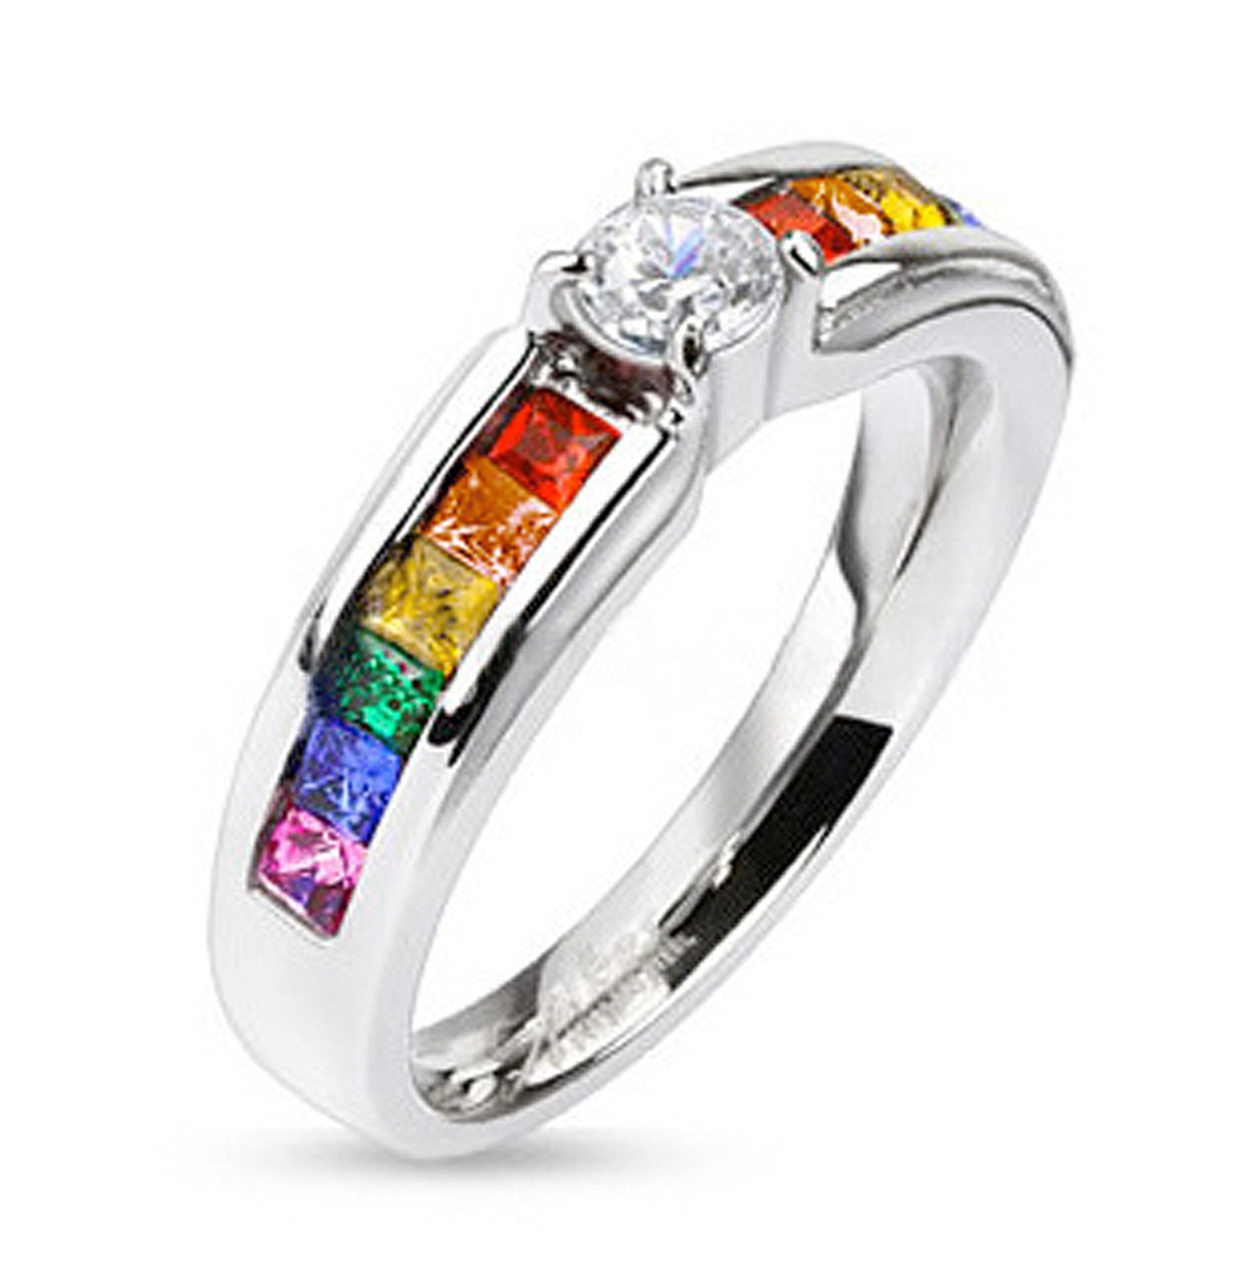 Amazon.com: ZKXXJ LGBT Rainbow Pride Rings for Gay & Lesbian - Matching  Couples CZ Cubic Zirconia Wedding Engagement Band Ring Gift for Him and  Him,Her and Her : Clothing, Shoes & Jewelry